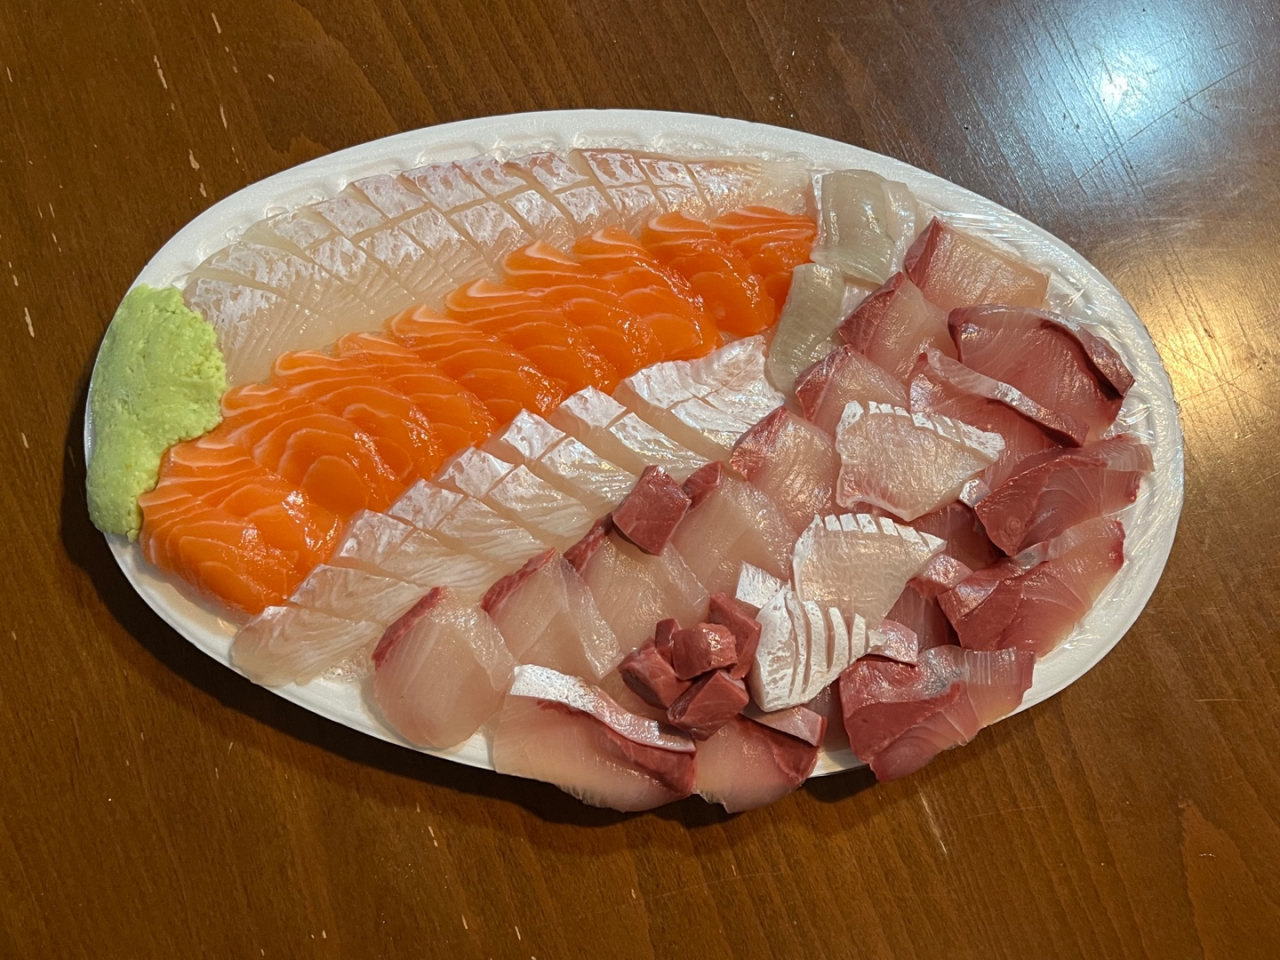 A plate of sashimi includes yellowtail to the right. Yellowtail sashimi is often served with other kinds of sashimi, including salmon and flatfish. (Lee Jaeeun/The Korea Herald)